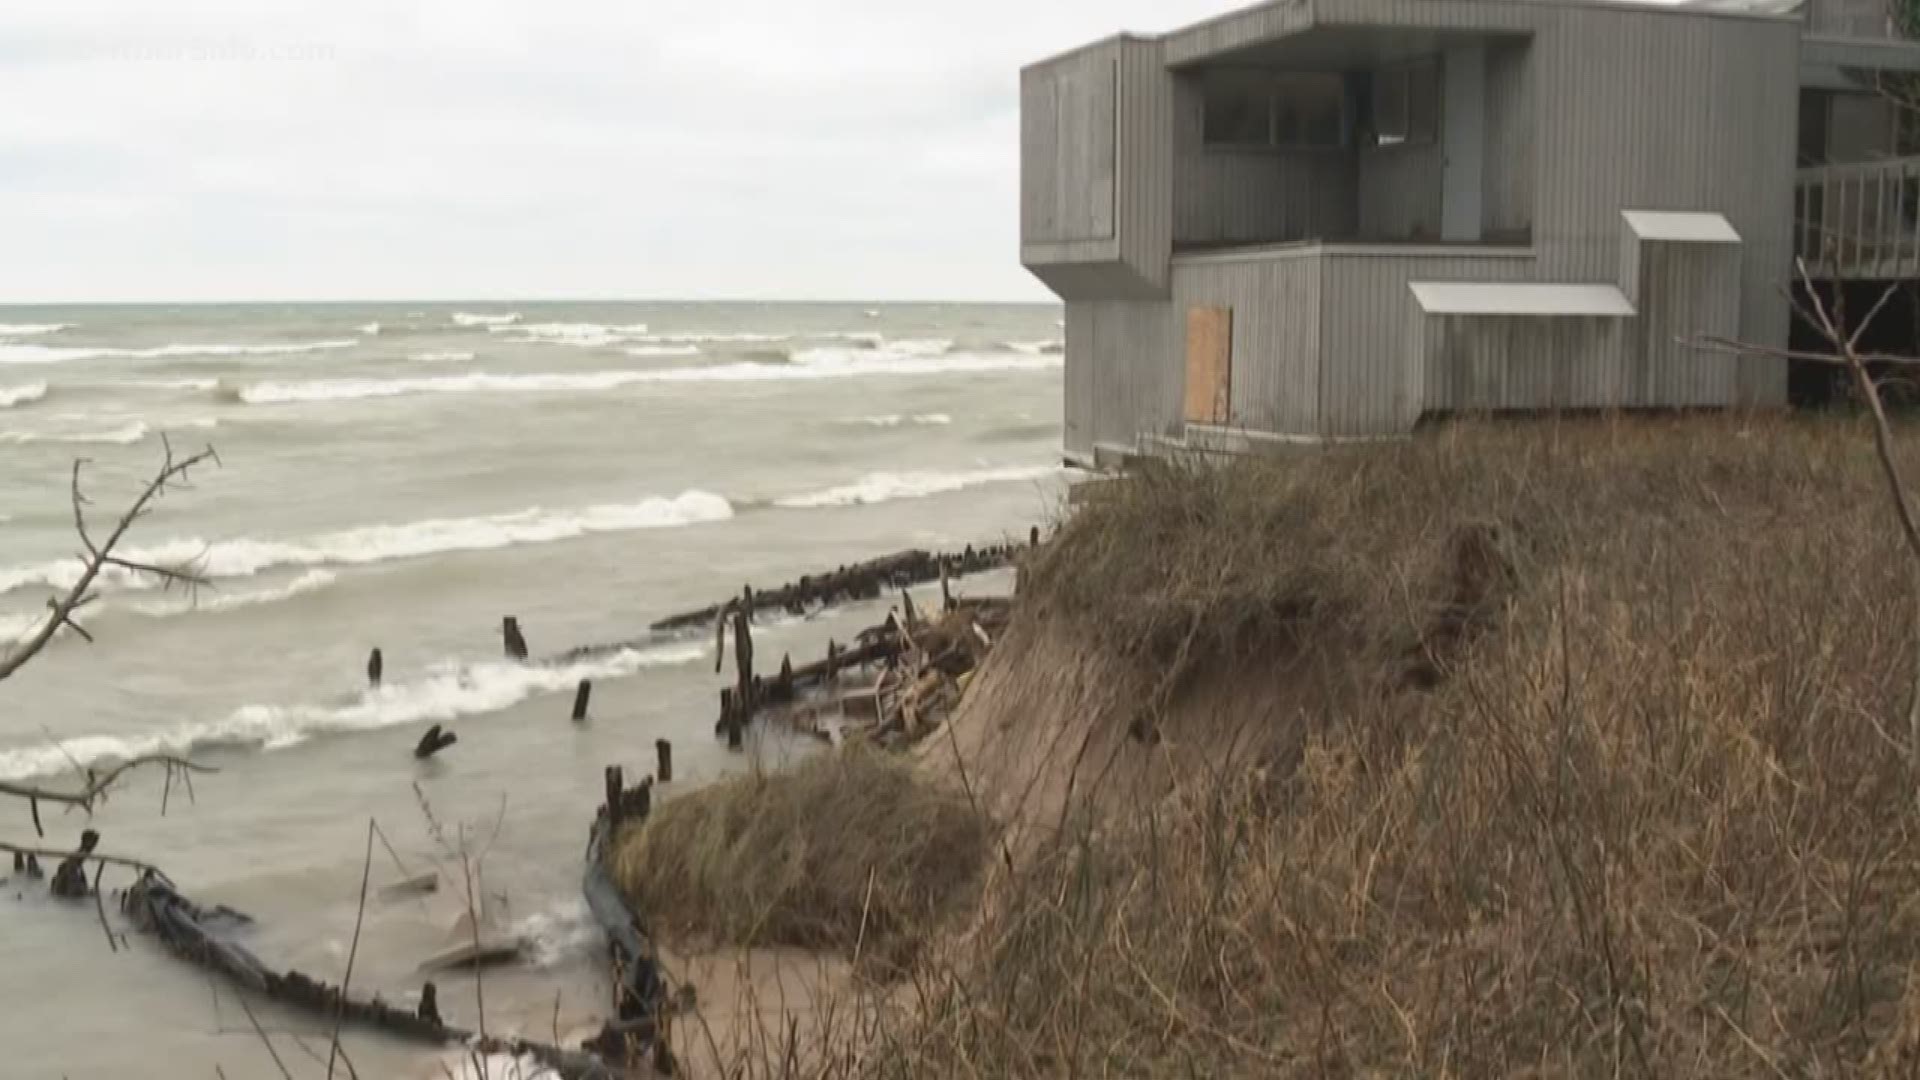 The basement game room at a cottage in Oceana County's Claybanks Township fell into Lake Michigan last week. Now a new storm threatens the rest of the structure.